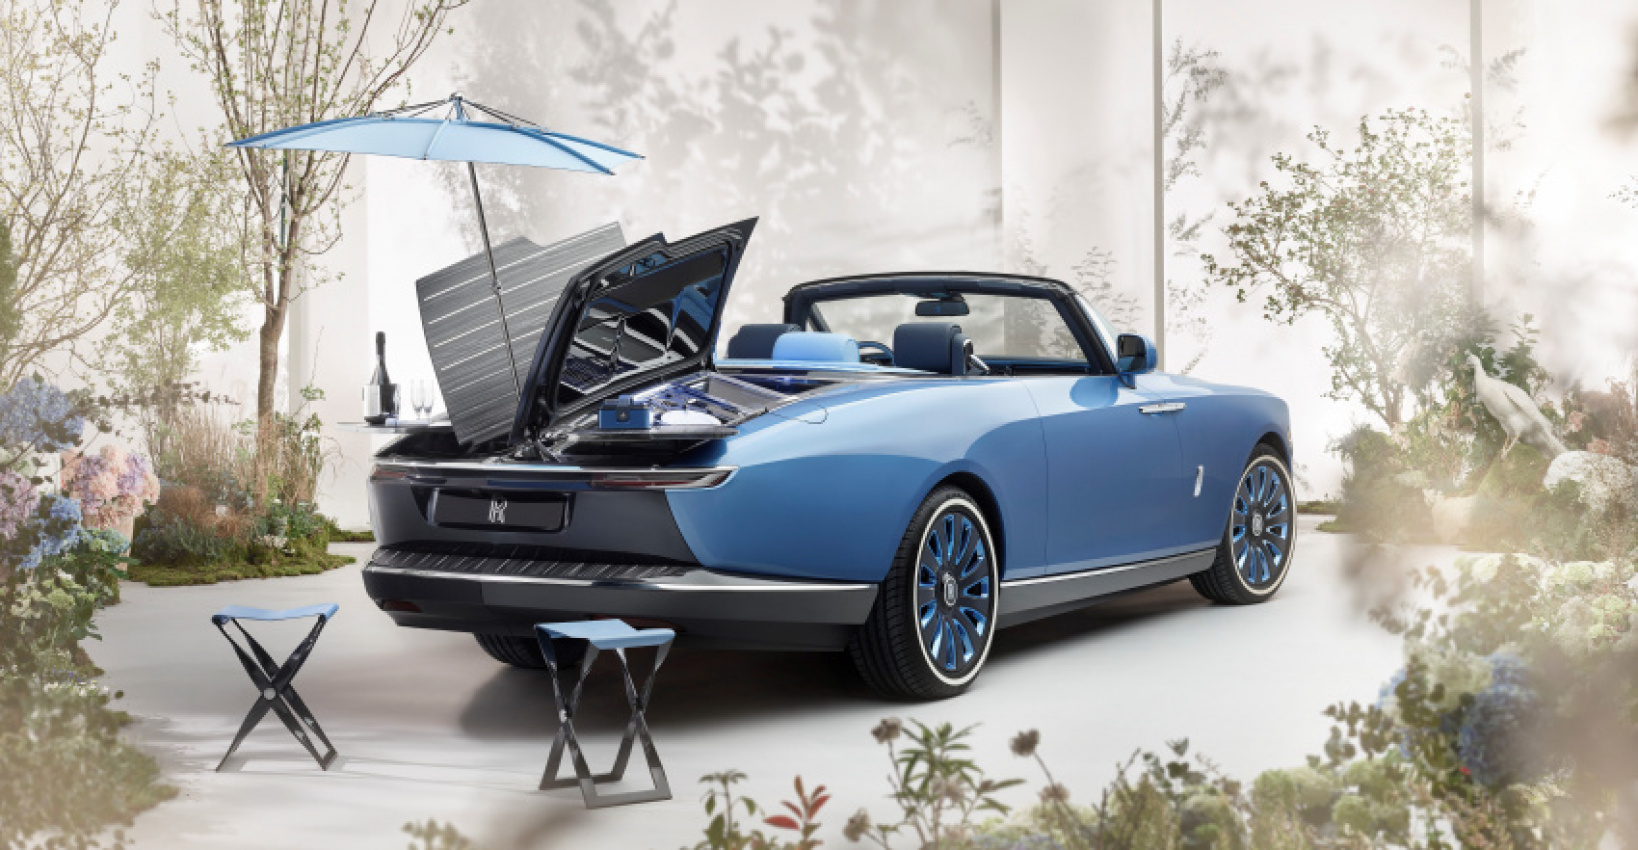 autos, cars, rolls-royce, car news, rolls-royce confirms return to bespoke coachbuilding with exclusive ‘boat tail’ model